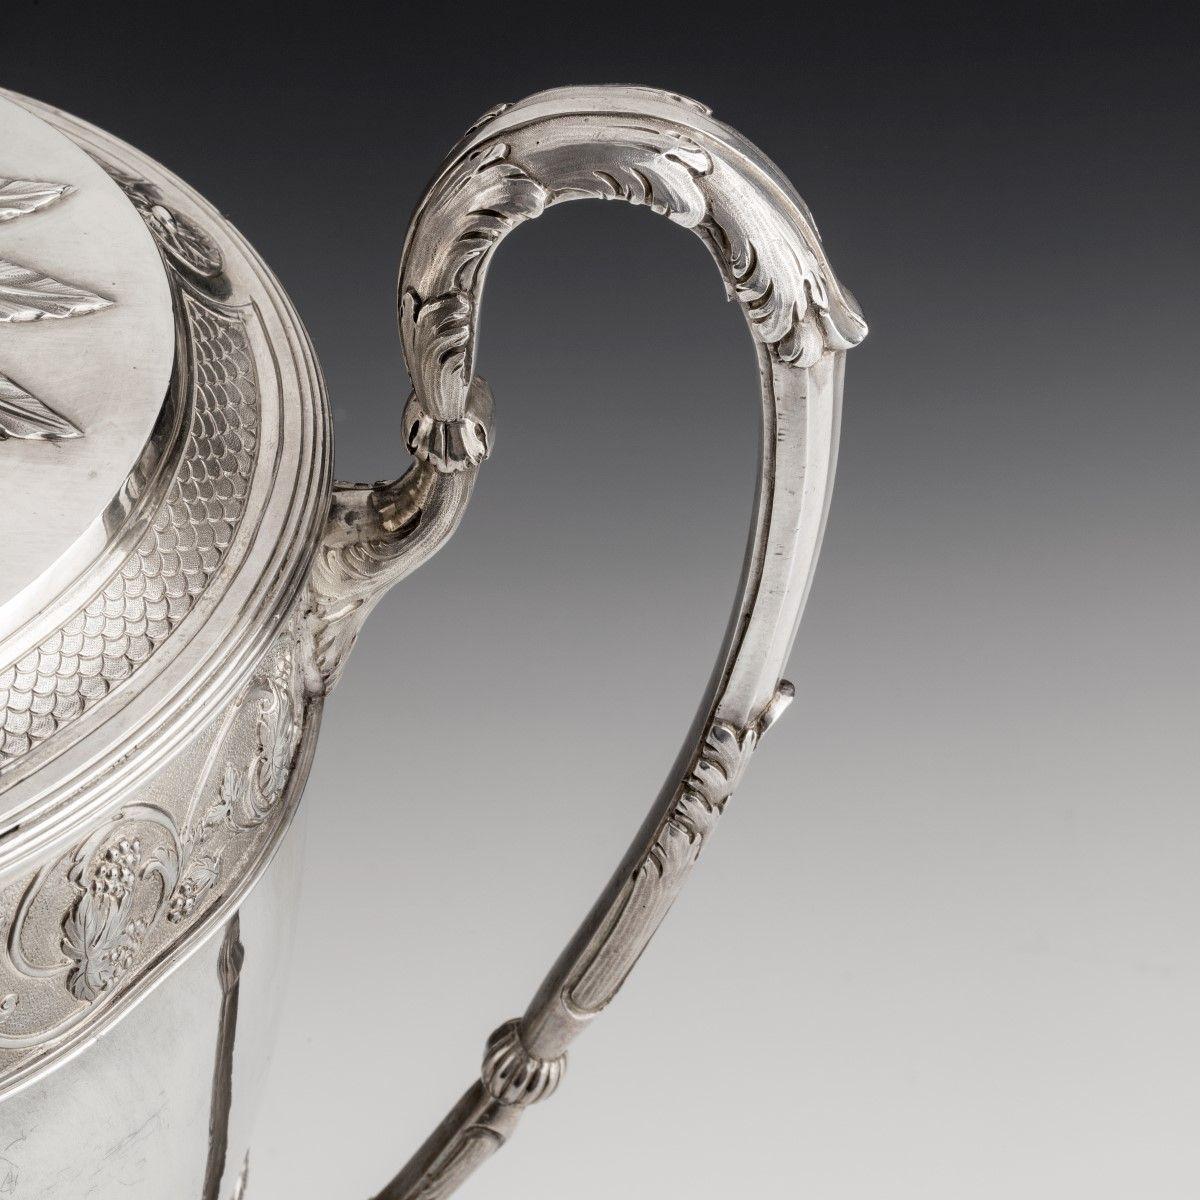 Trinity House silver presentation cup and cover 1795